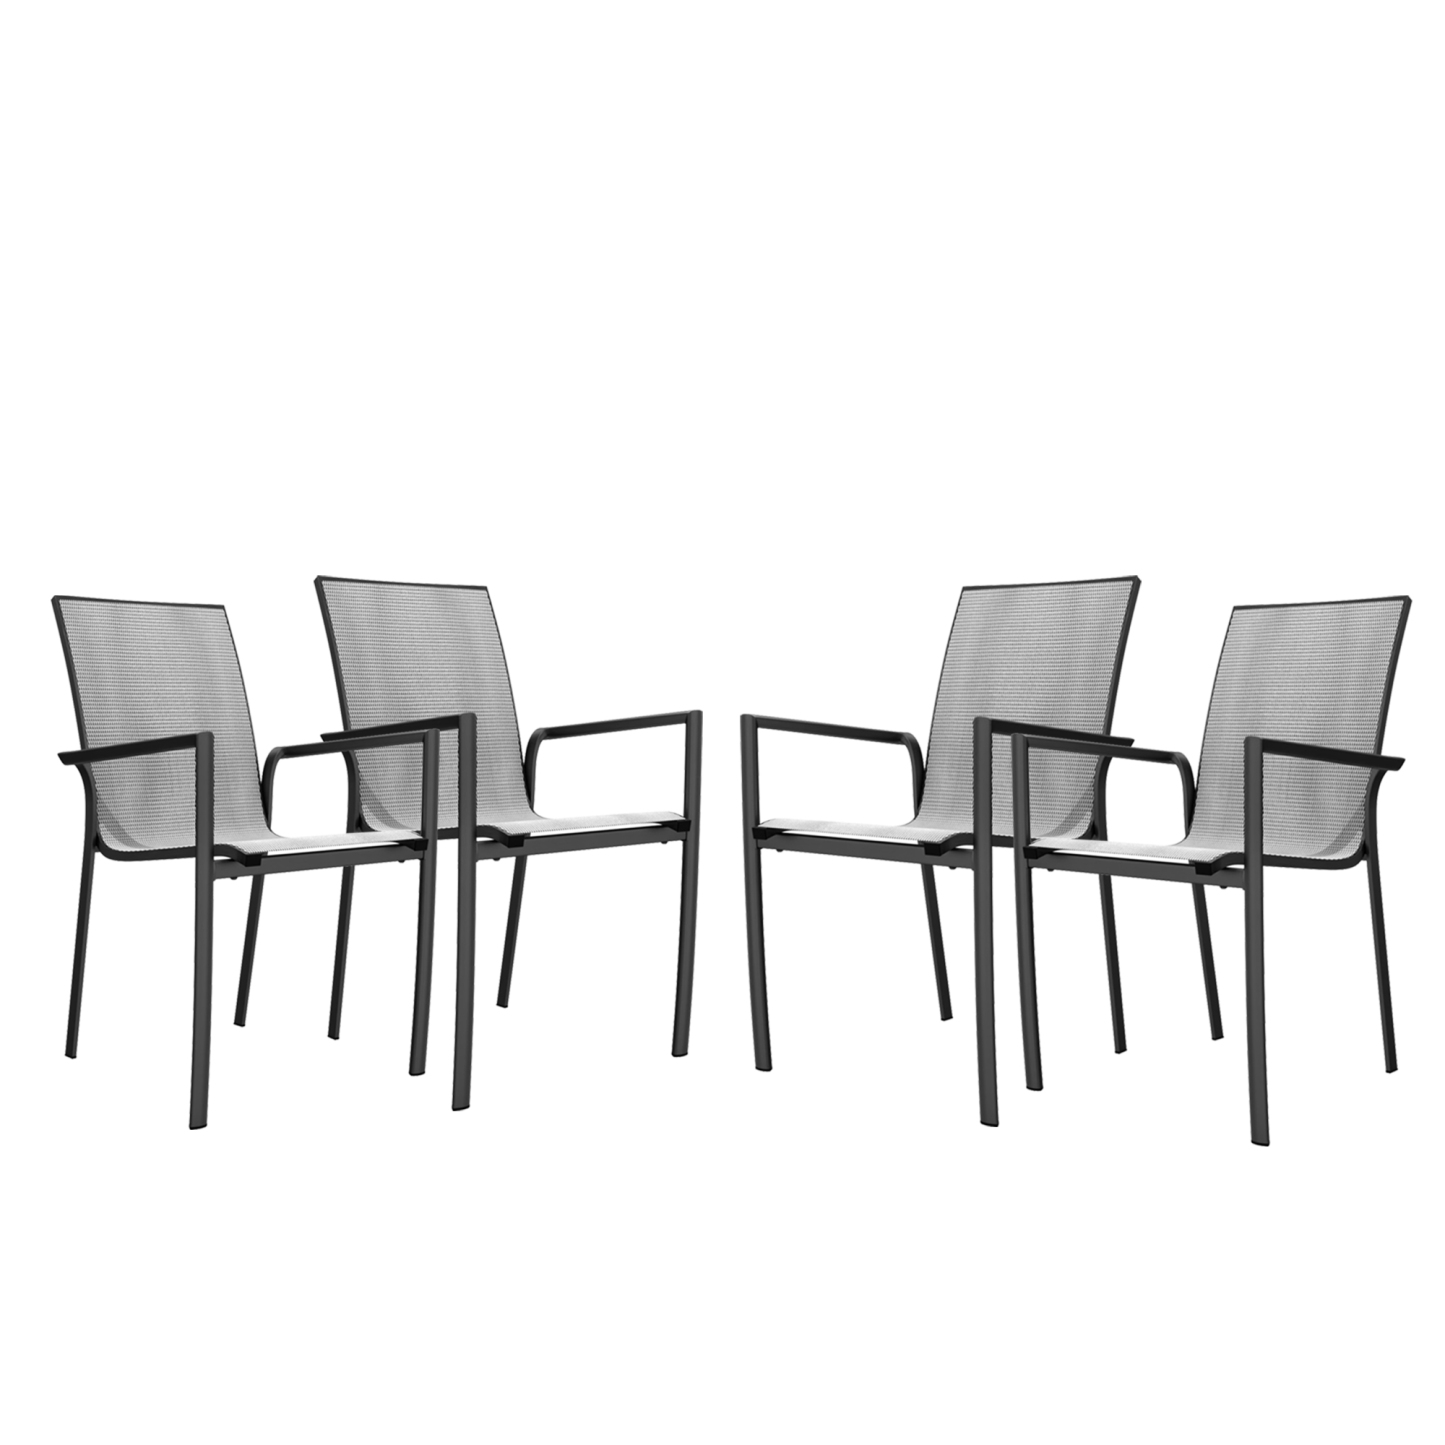 Mondawe Aluminium Frame with Stackable Dining Chairs-Mondawe